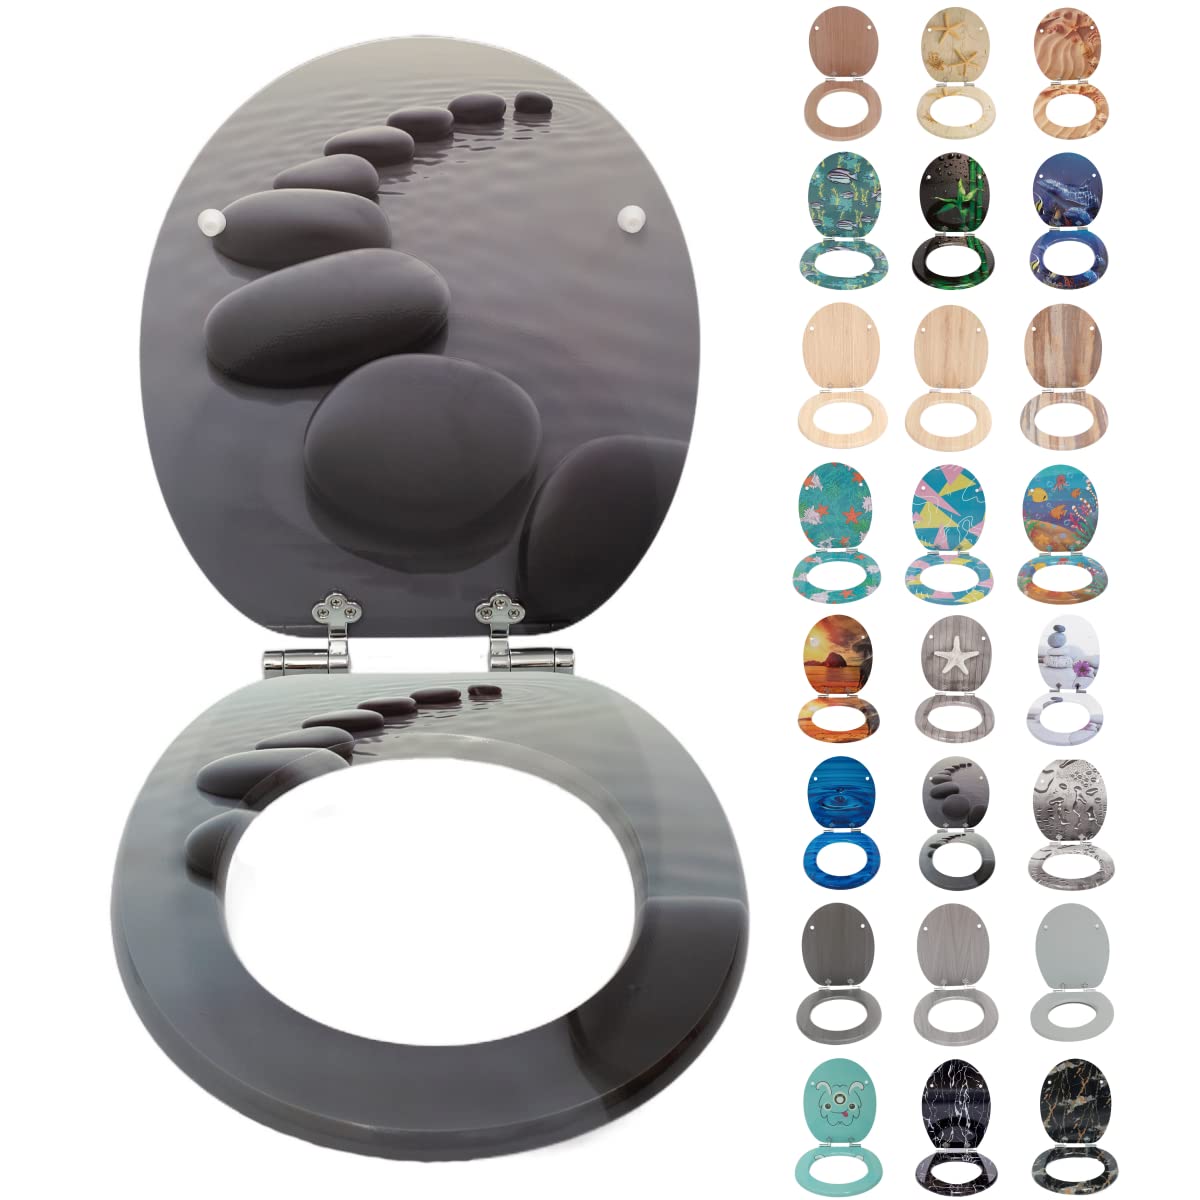 toilet seats for sale cheap Novelty toilet seats for sale in uk